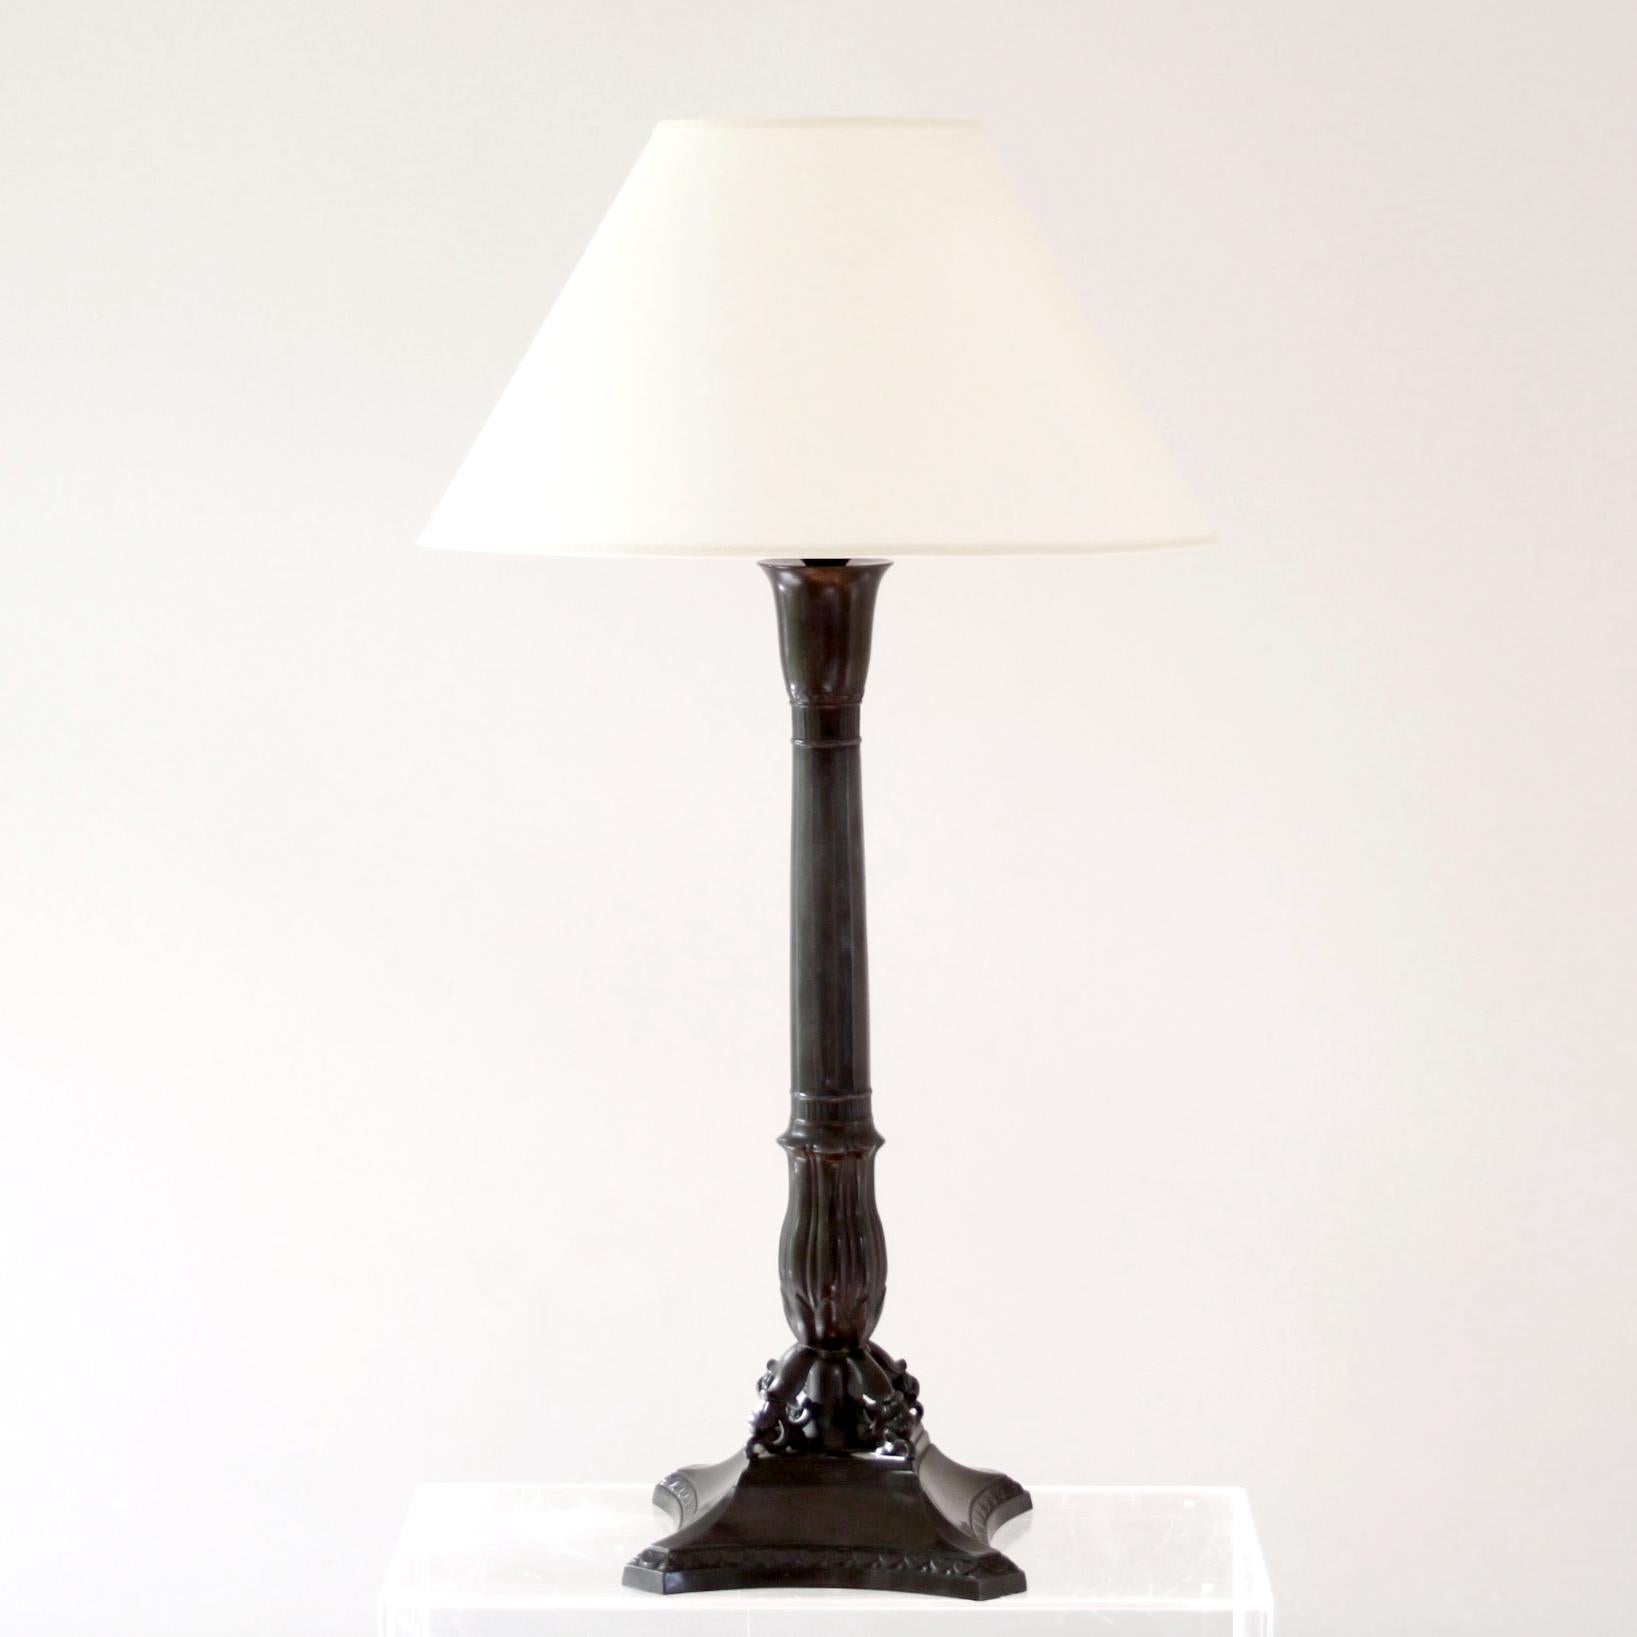 JUST ANDERSEN   -  DENMARK 1920s
 
Large and rare table lamp in patinated disko metal made by Danish designer and pioneer Just Andersen in 1920s. 

The lamp is beautifully decorated with ornaments. 

Early design, Dessin D8, stamped underneath.

The